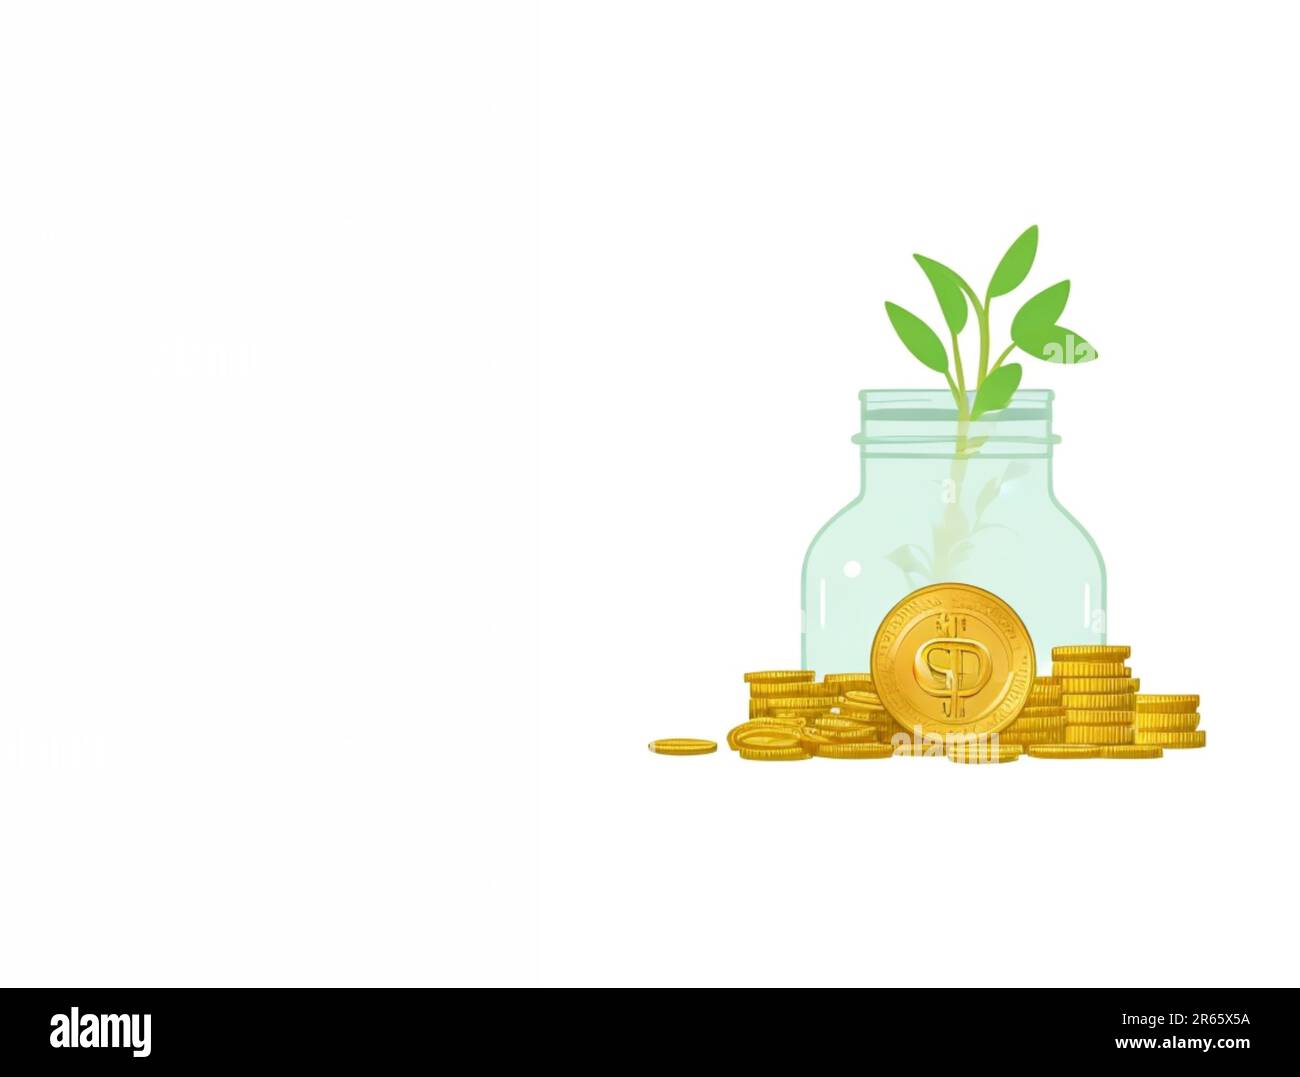 Saving money business concept with piggy bank, tree, coins, money, copy space on isolated white background Stock Photo